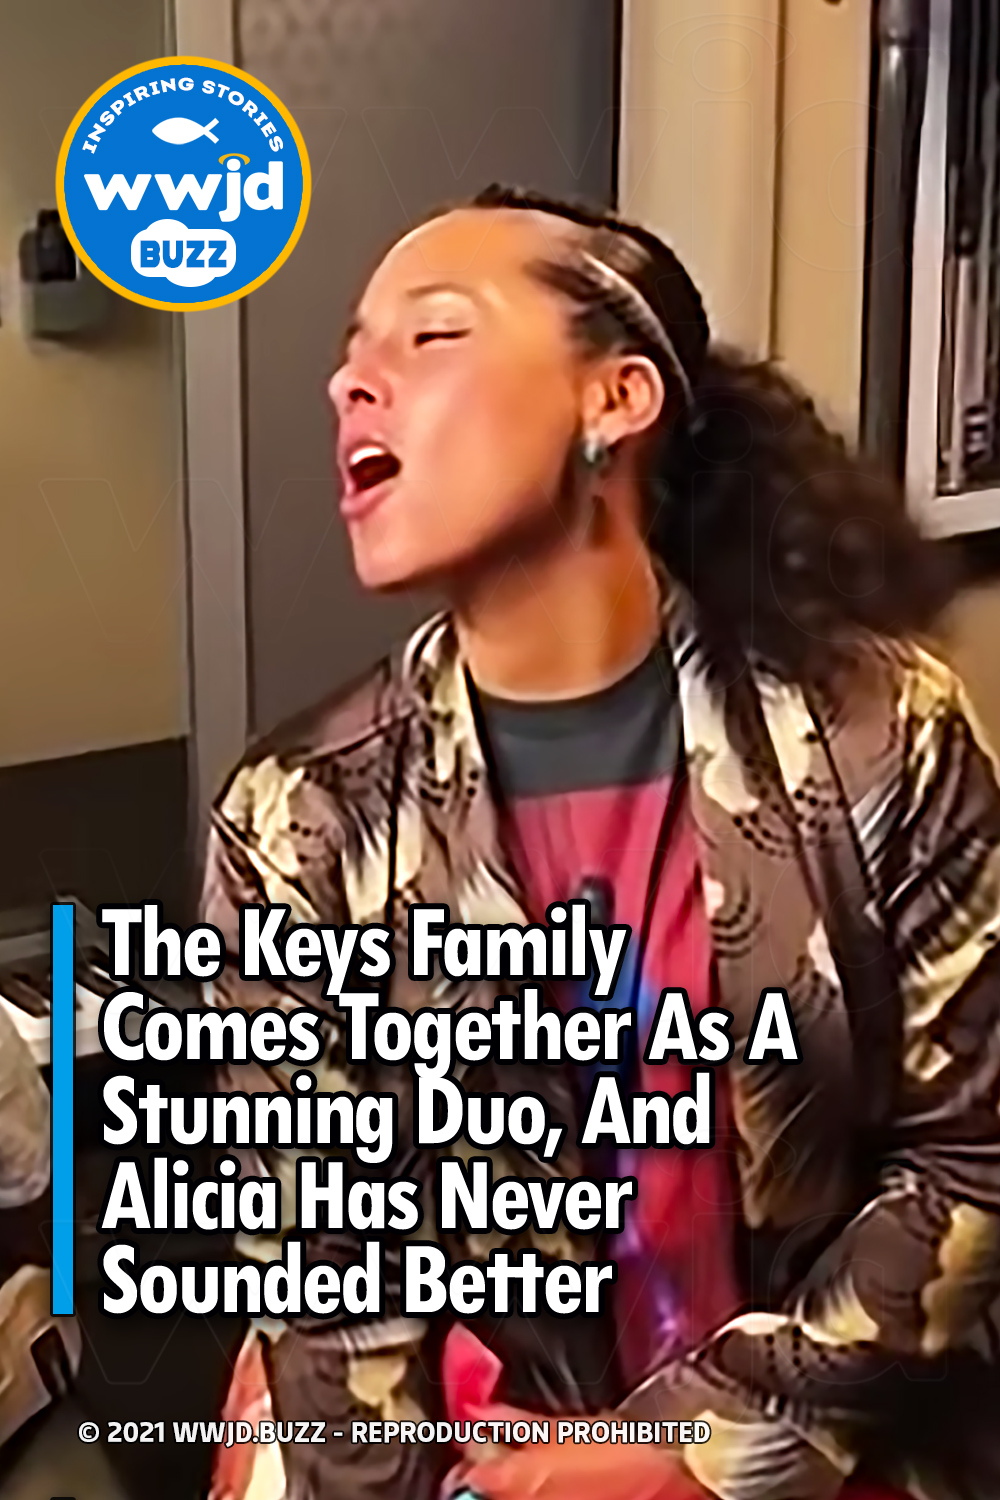 The Keys Family Comes Together As A Stunning Duo, And Alicia Has Never Sounded Better